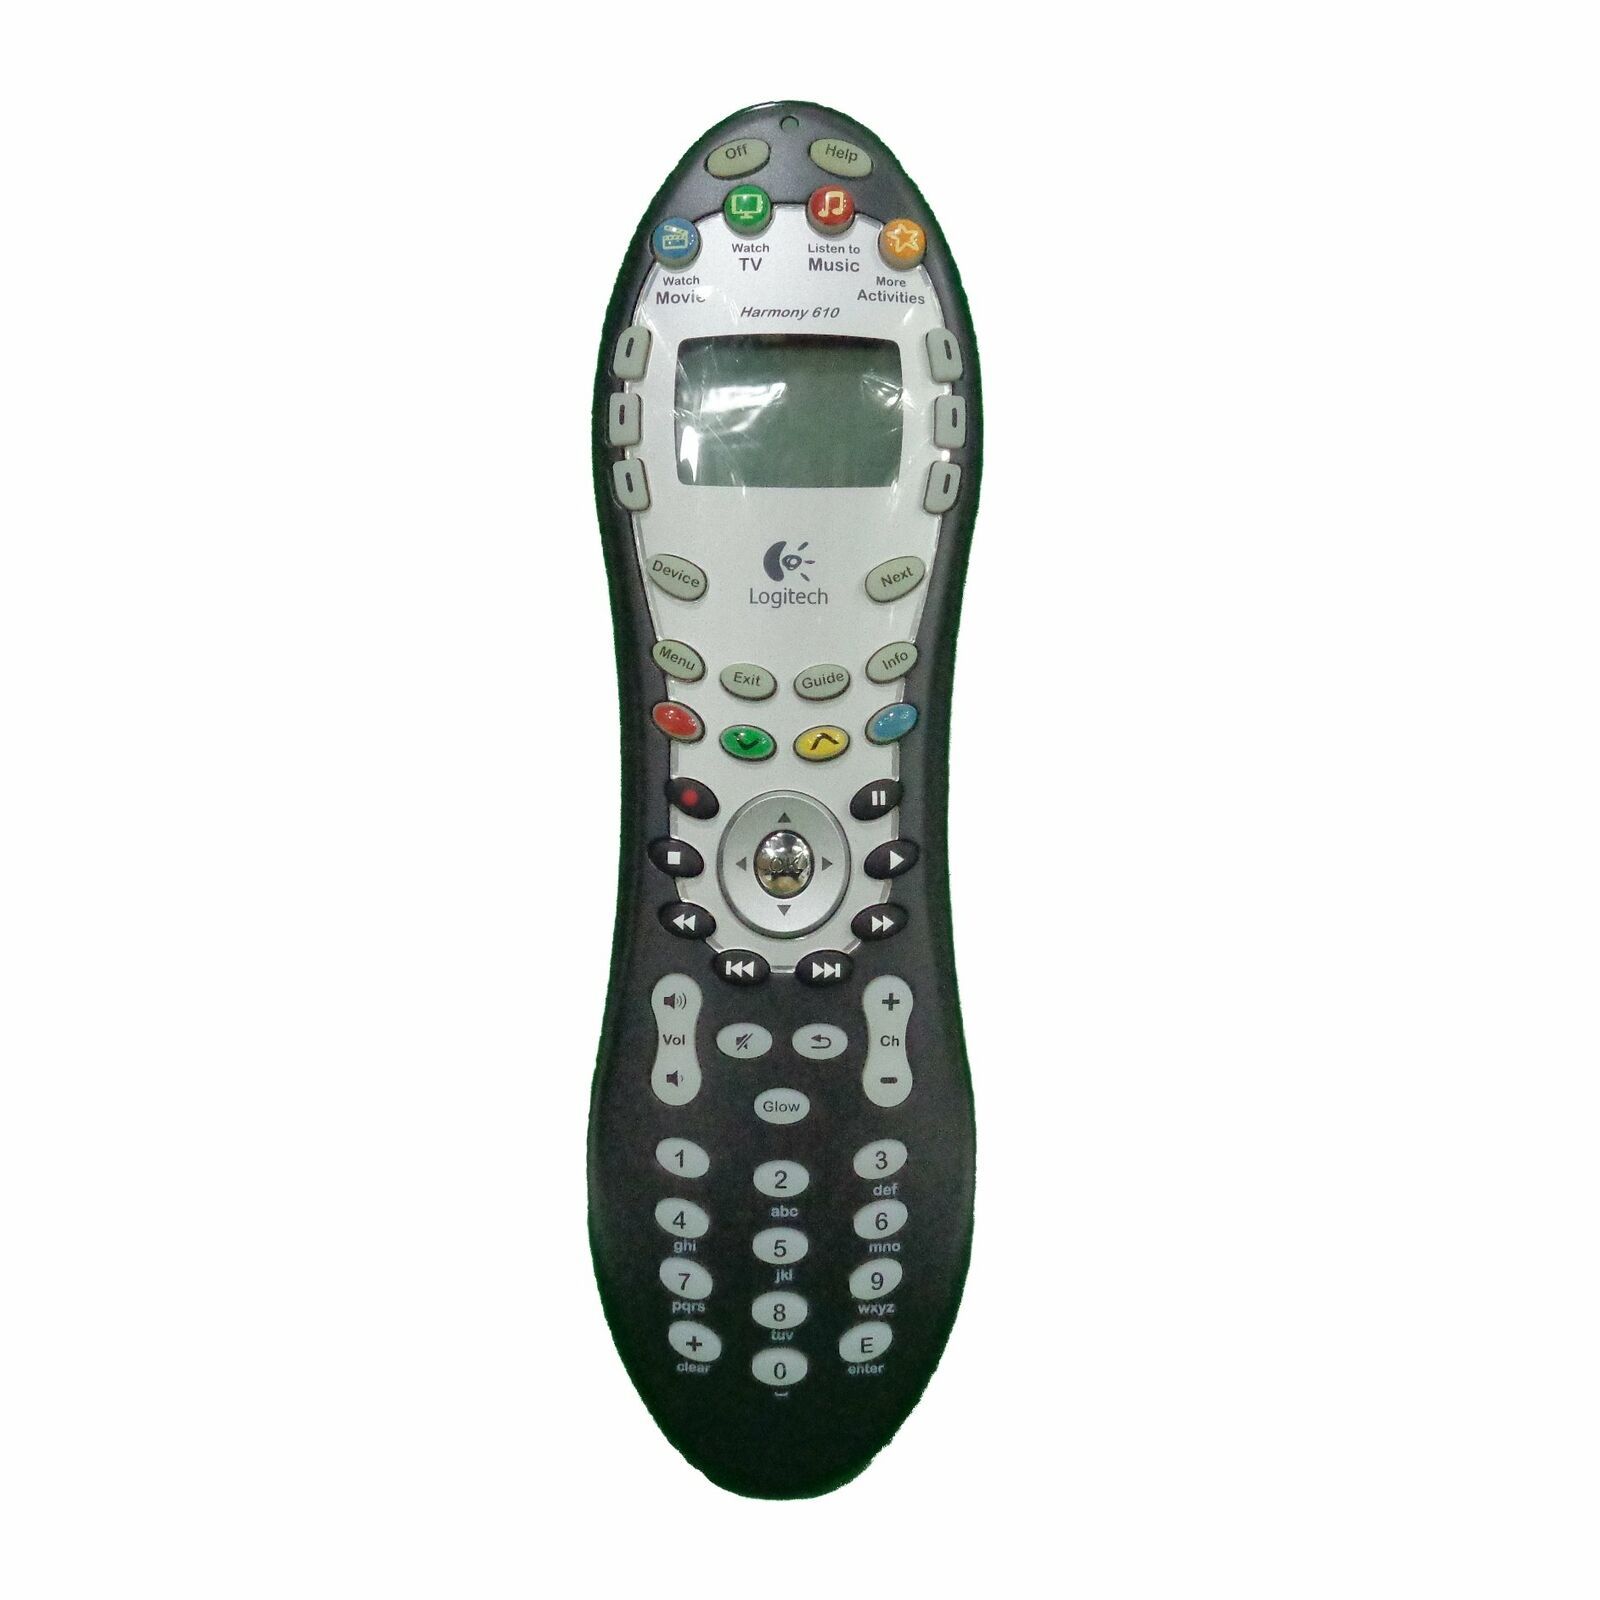 Primary image for Logitech Harmony 610 5 Device Advanced Universal Remote Control